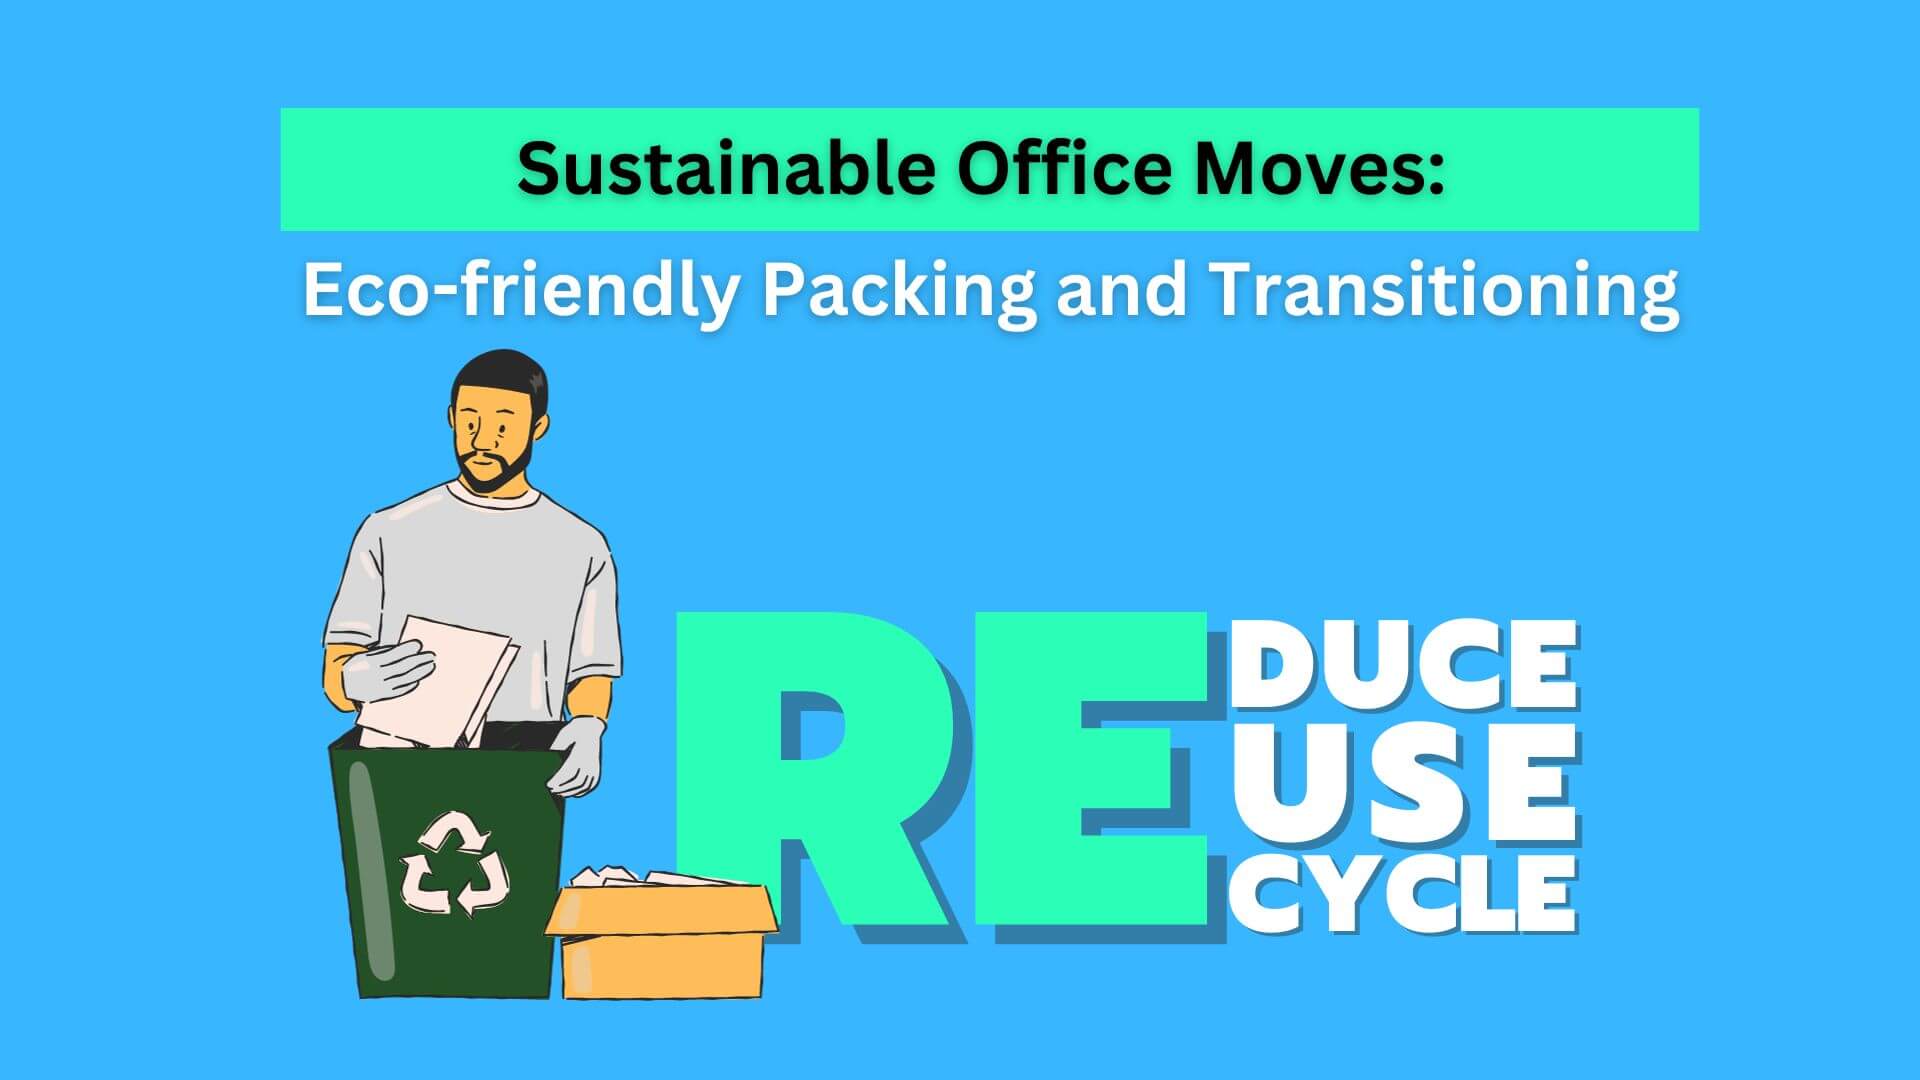 Sustainable Office Moves: Eco-friendly Packing and Transitioning